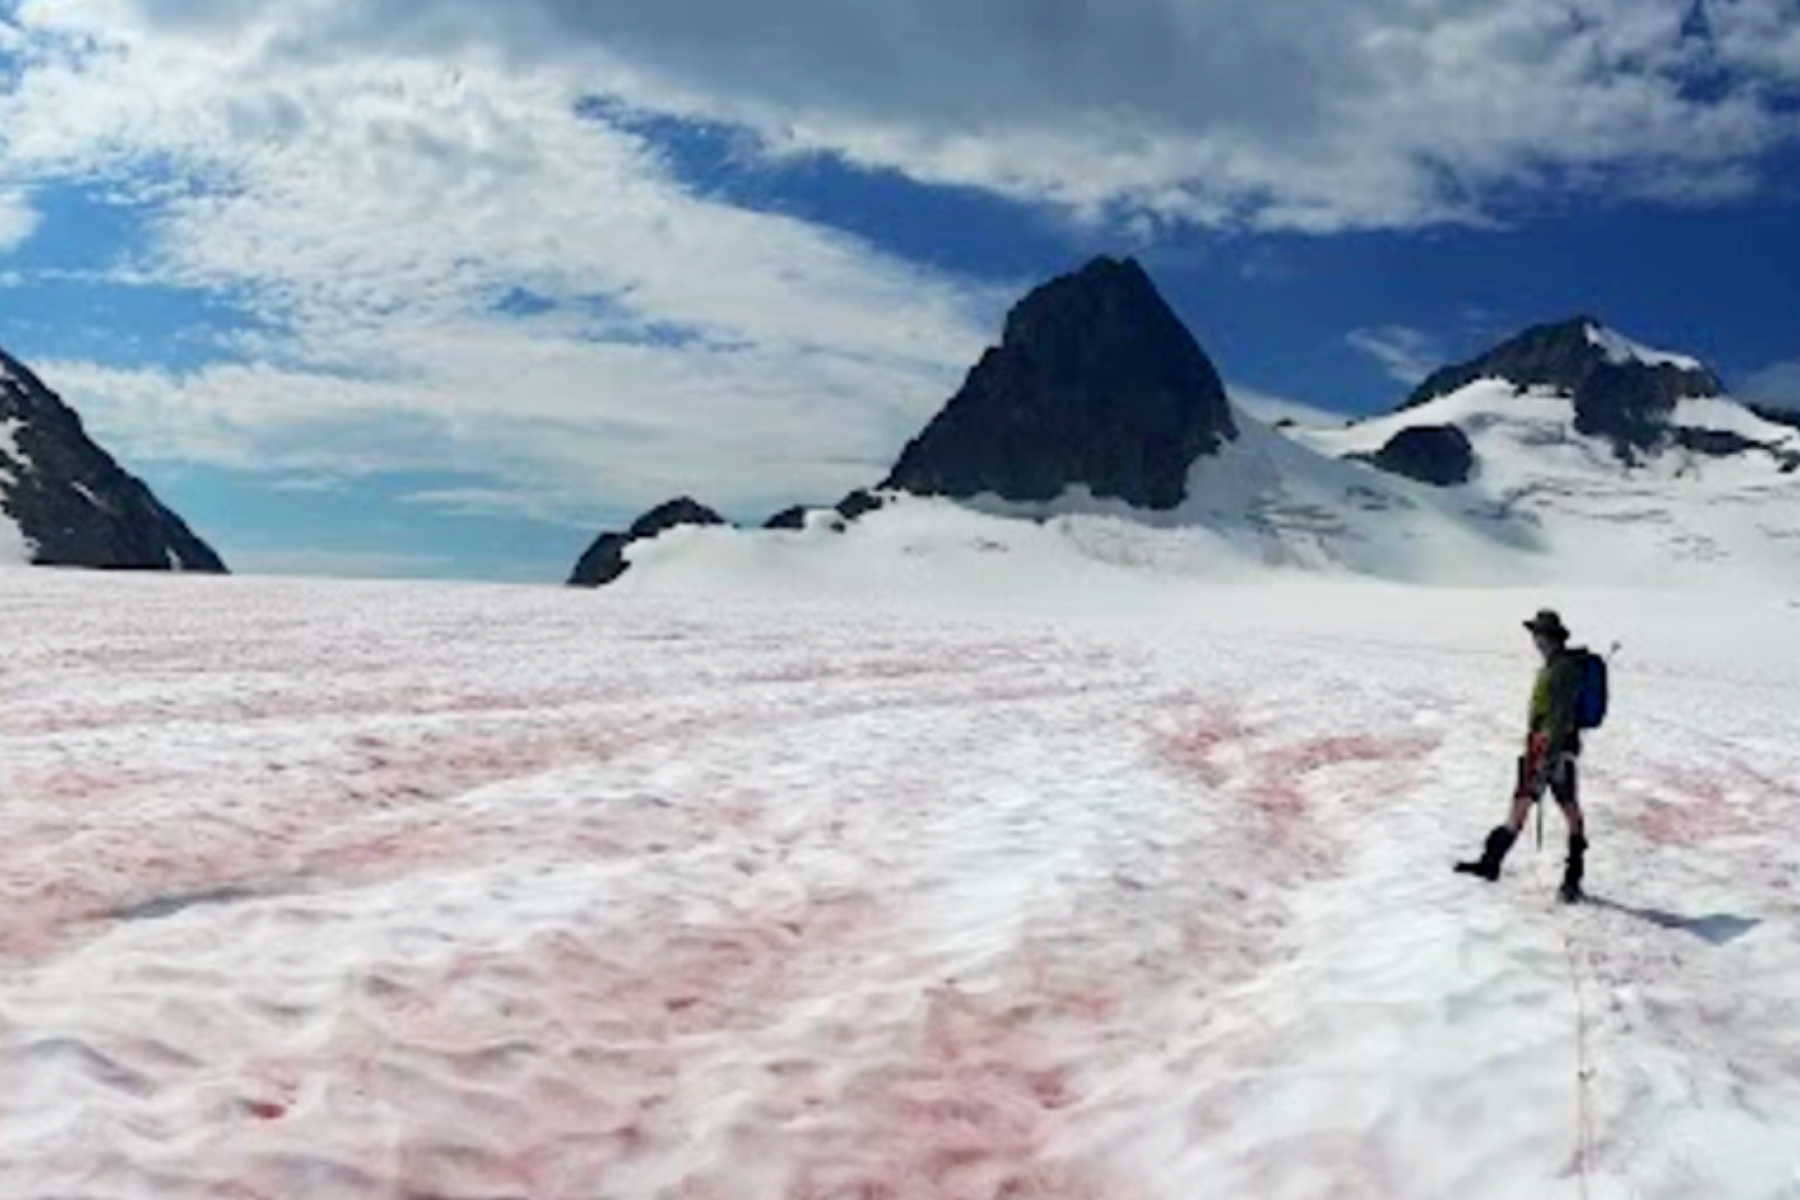 Watermelon Snow Is Threatening Glaciers within the US